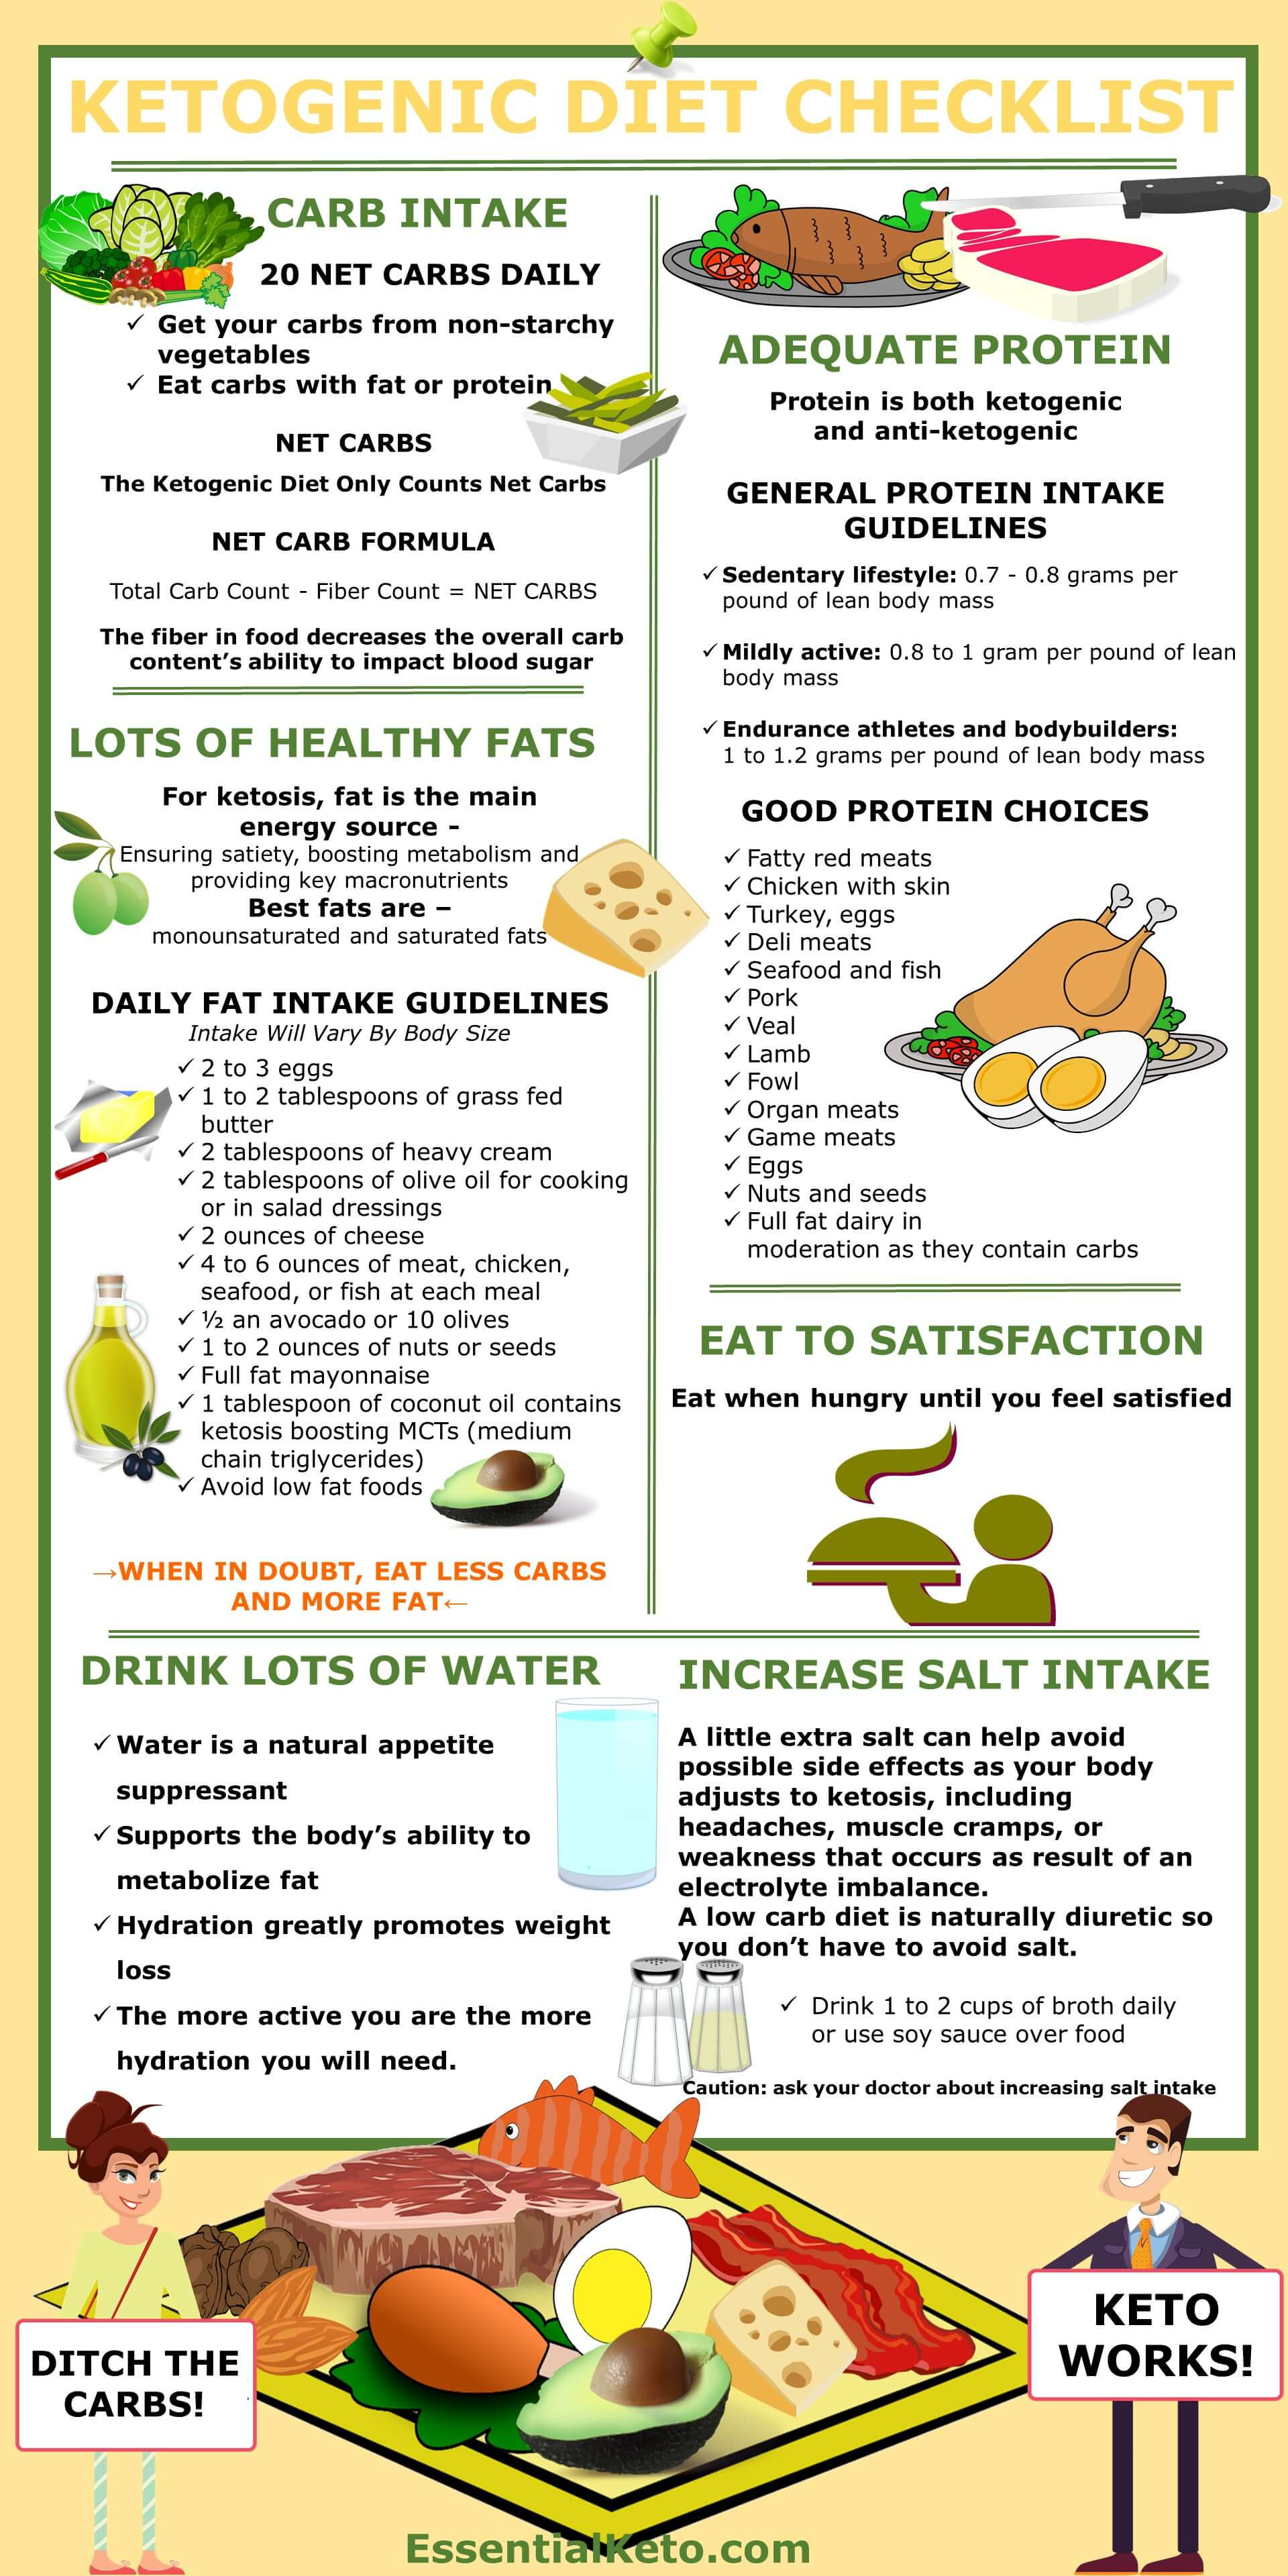 Foods To Eat On A Keto Diet
 Ketogenic Diet Checklist